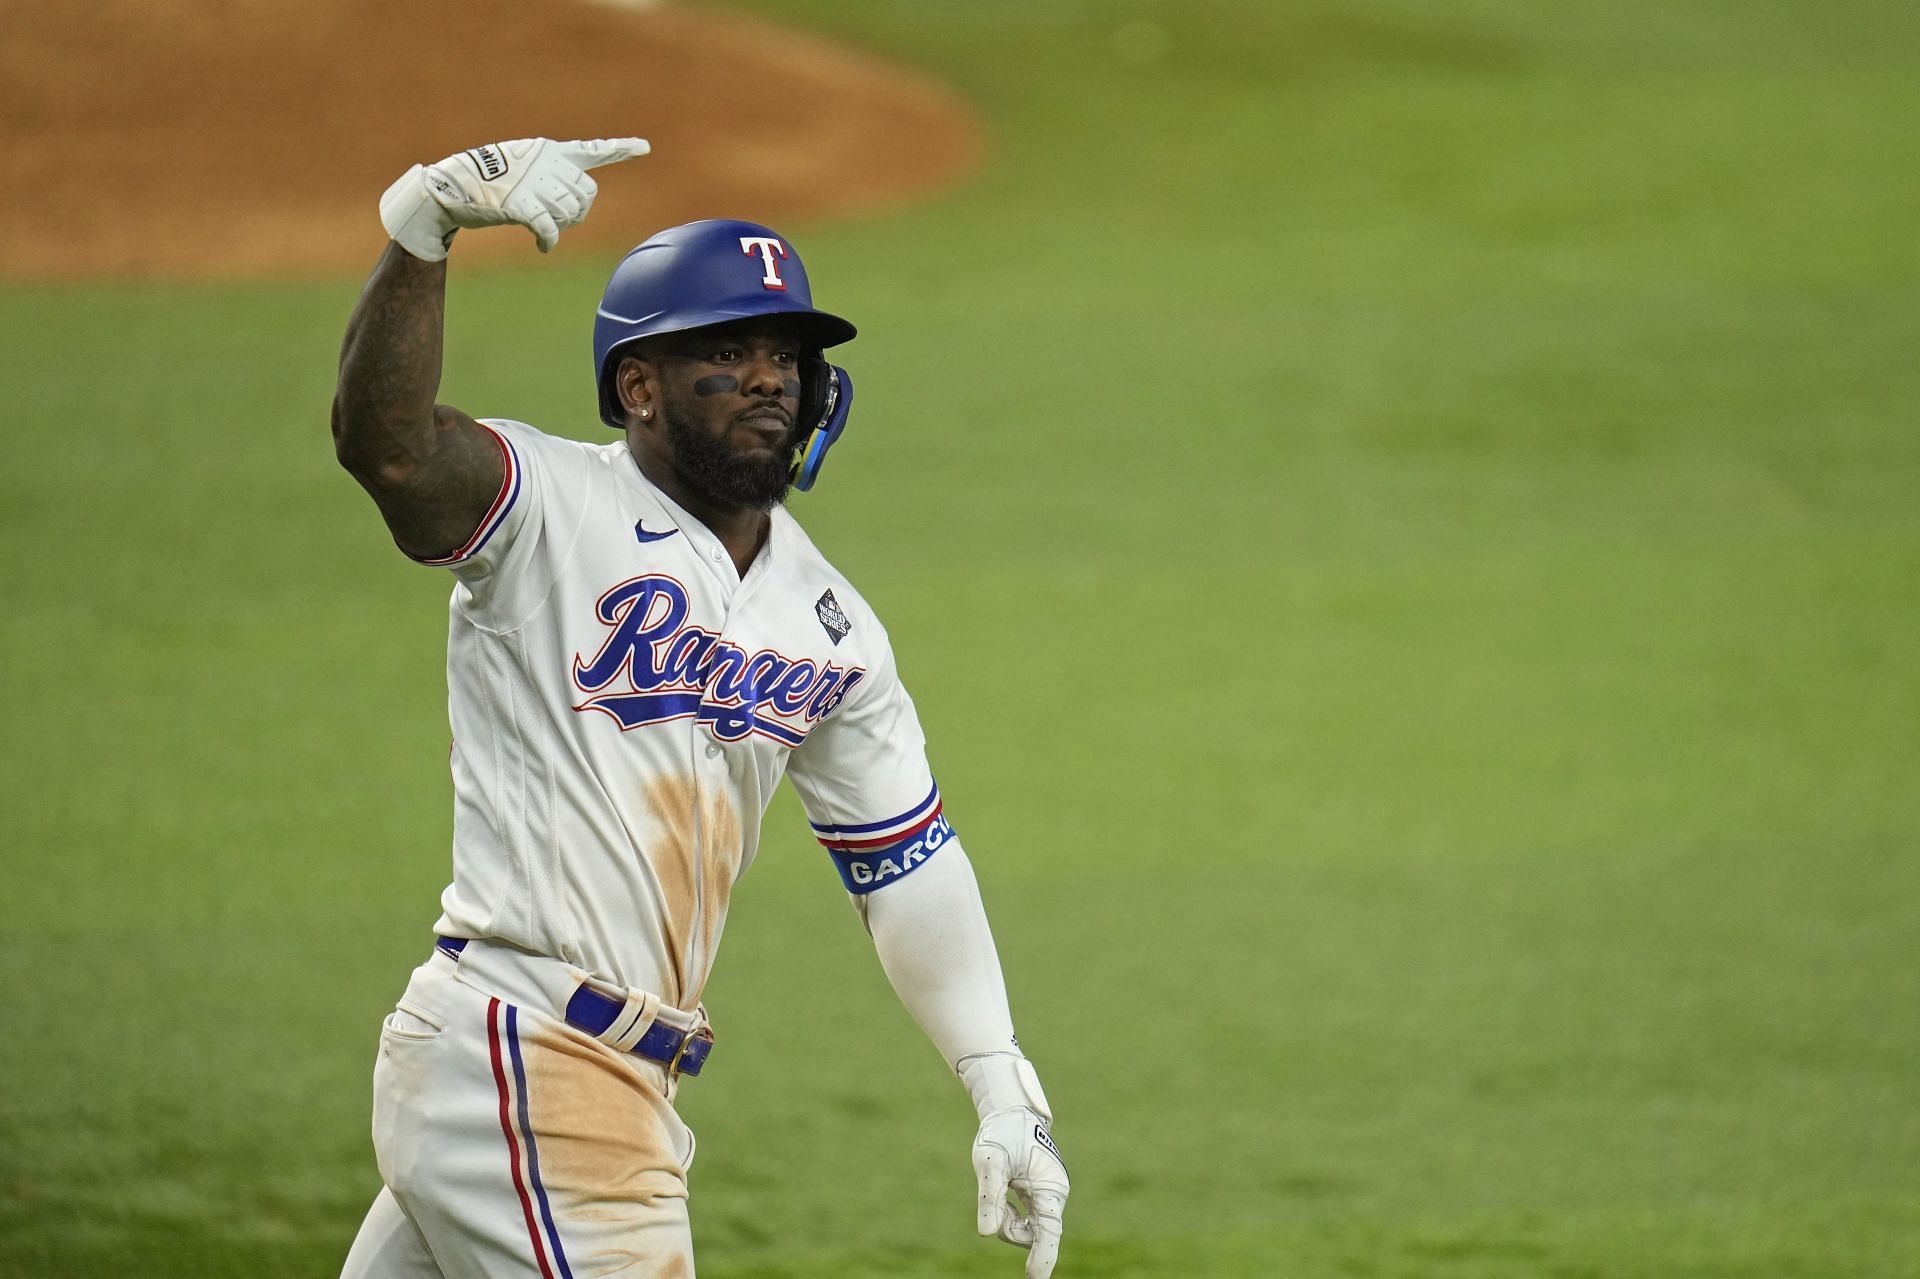 Adolis Garcia has made significant impact in the Rangers roster this postseason, setting the record for the most RBIs, with 22, in just 13 games.